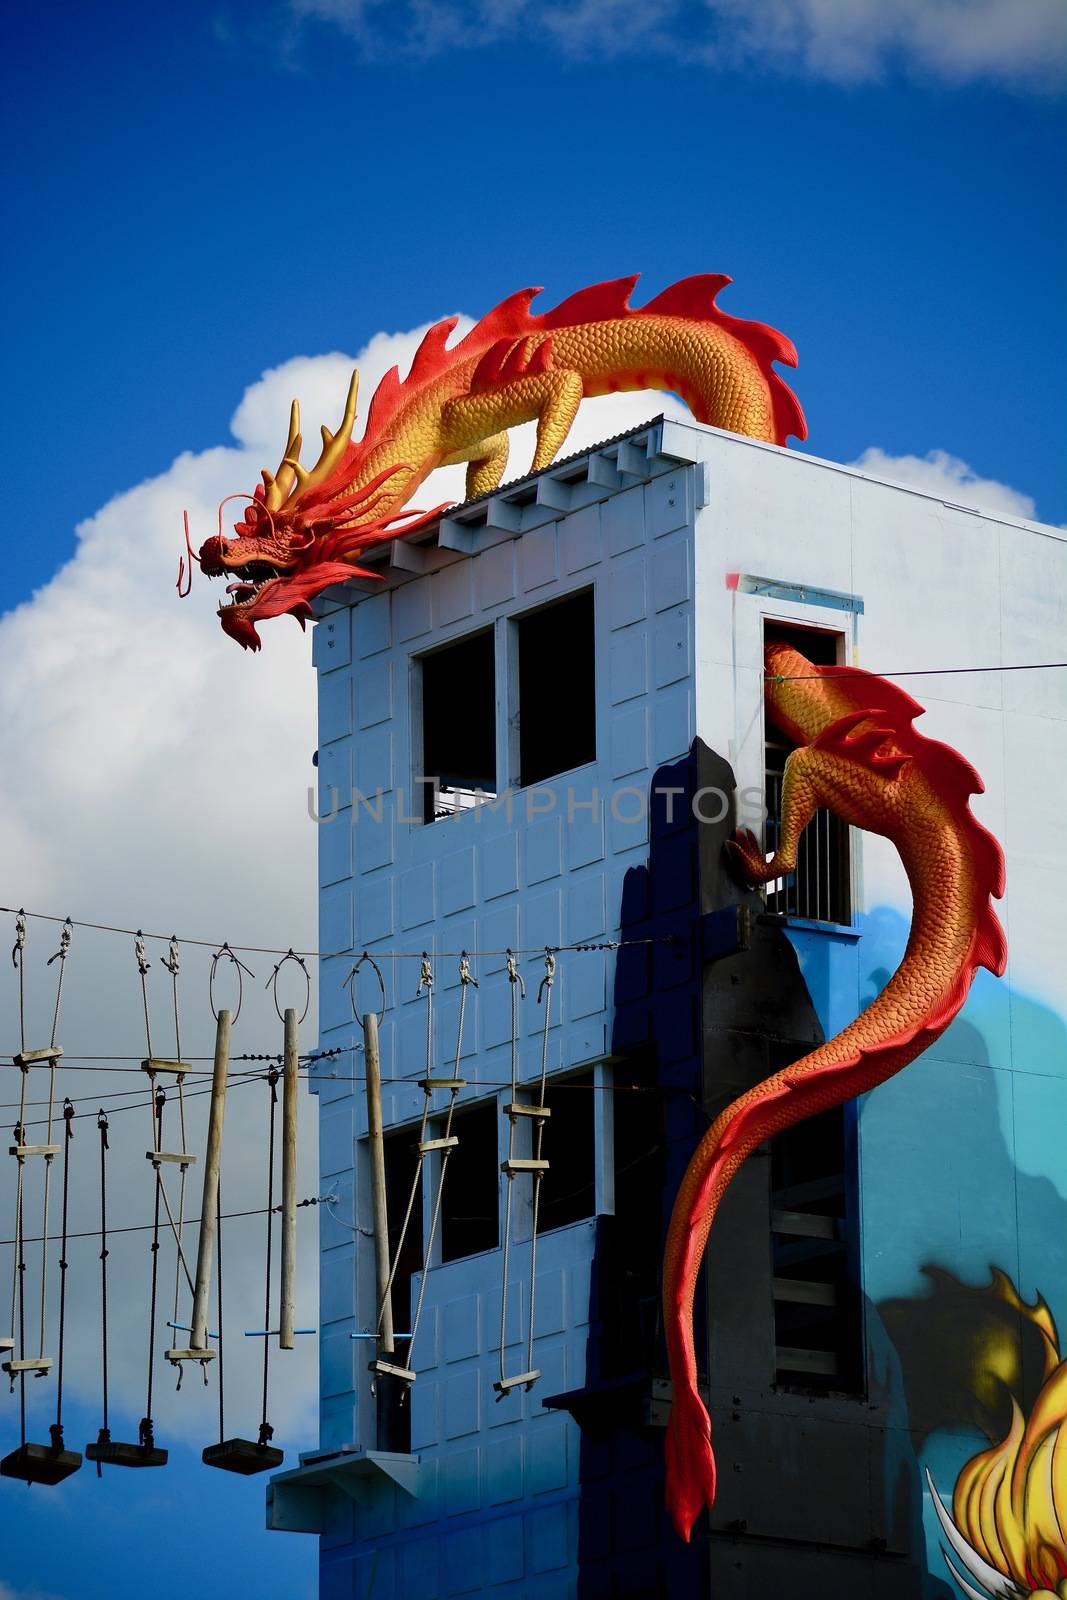 some of the world’s most fantastical legends; life-sized dragon; Mythic Creatures exhibit; local attraction